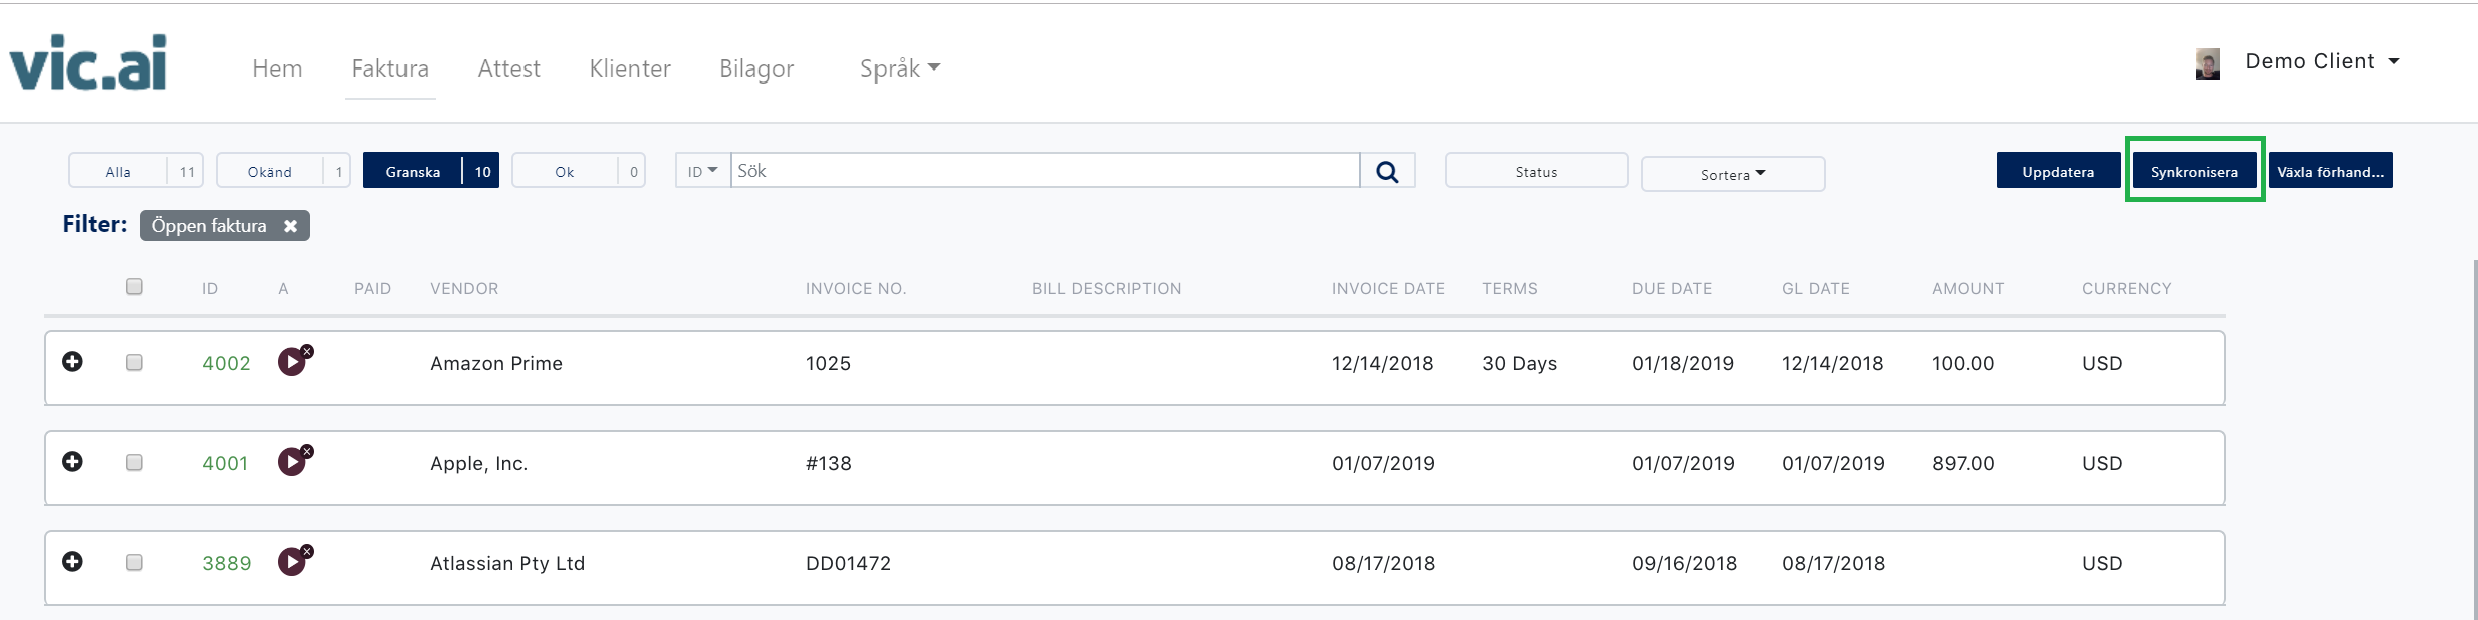 Vic_ai_Dashboard_Invoice_Overview_4.png